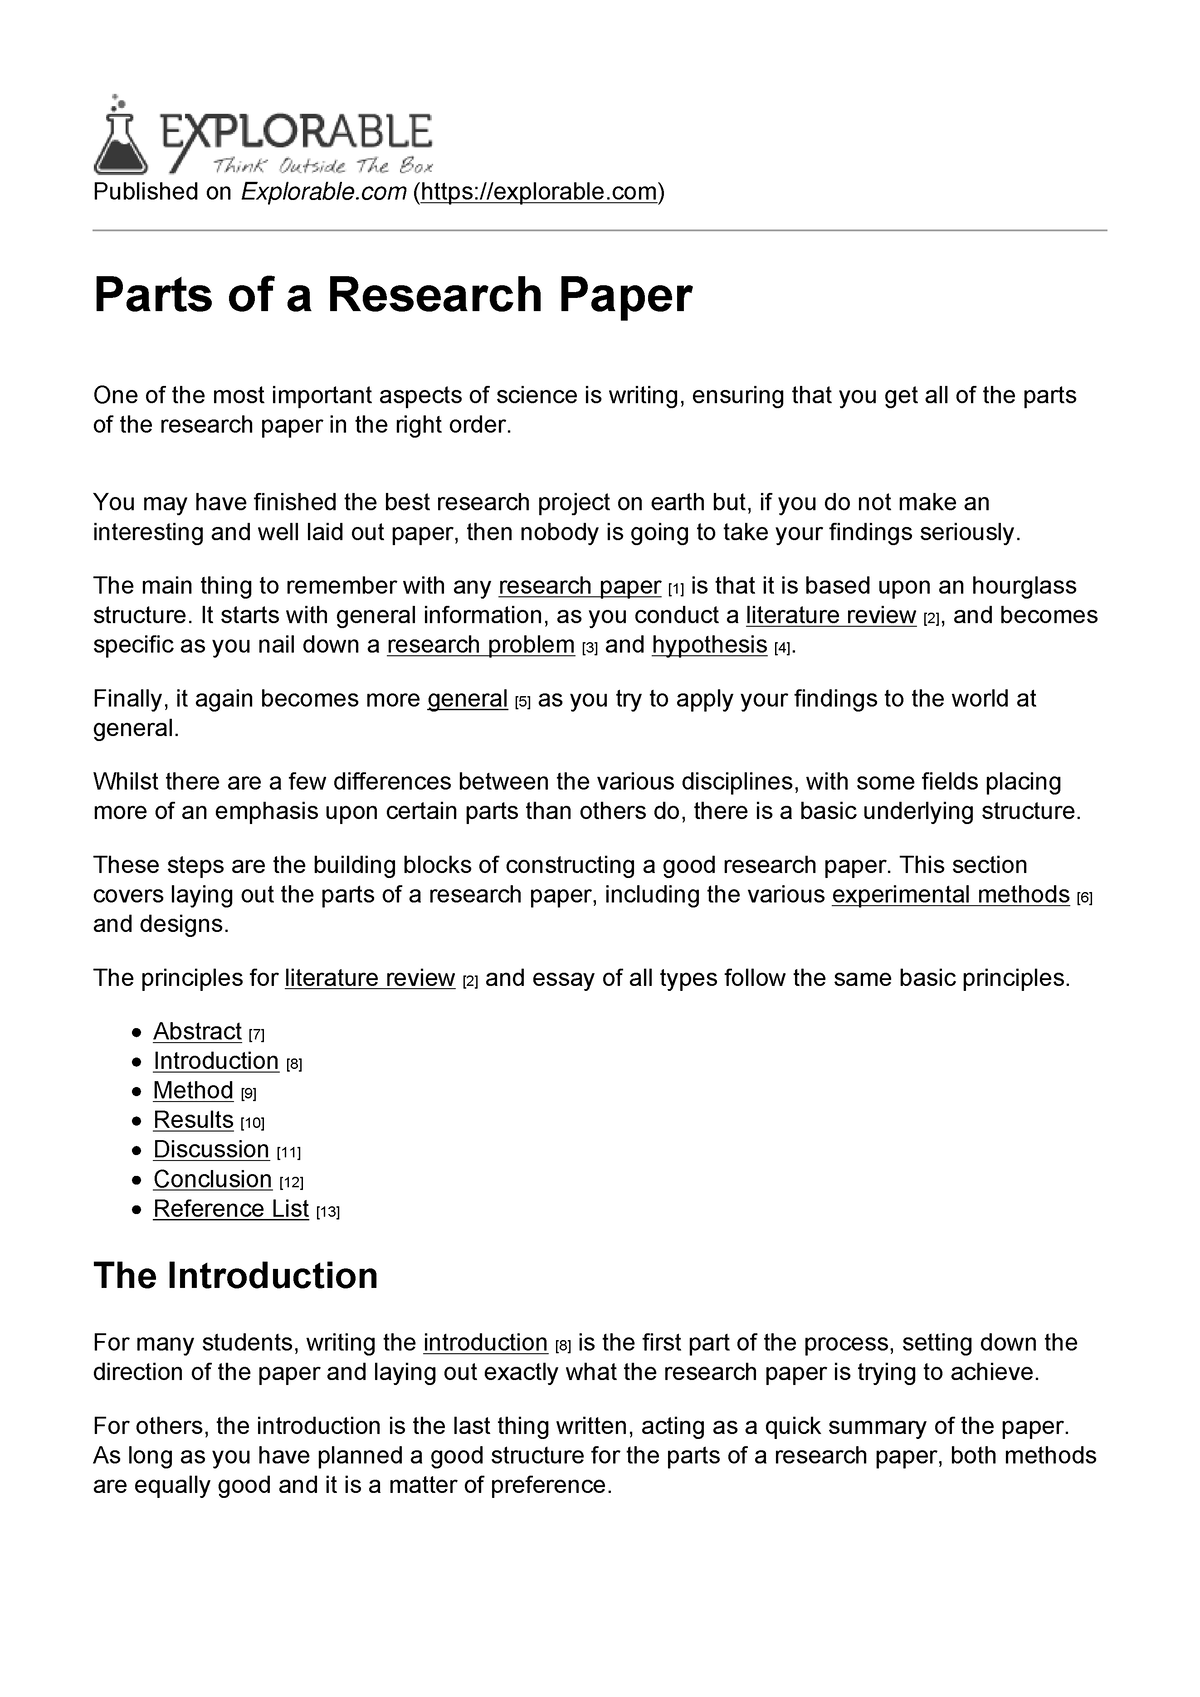 cite at least four parts of a research paper